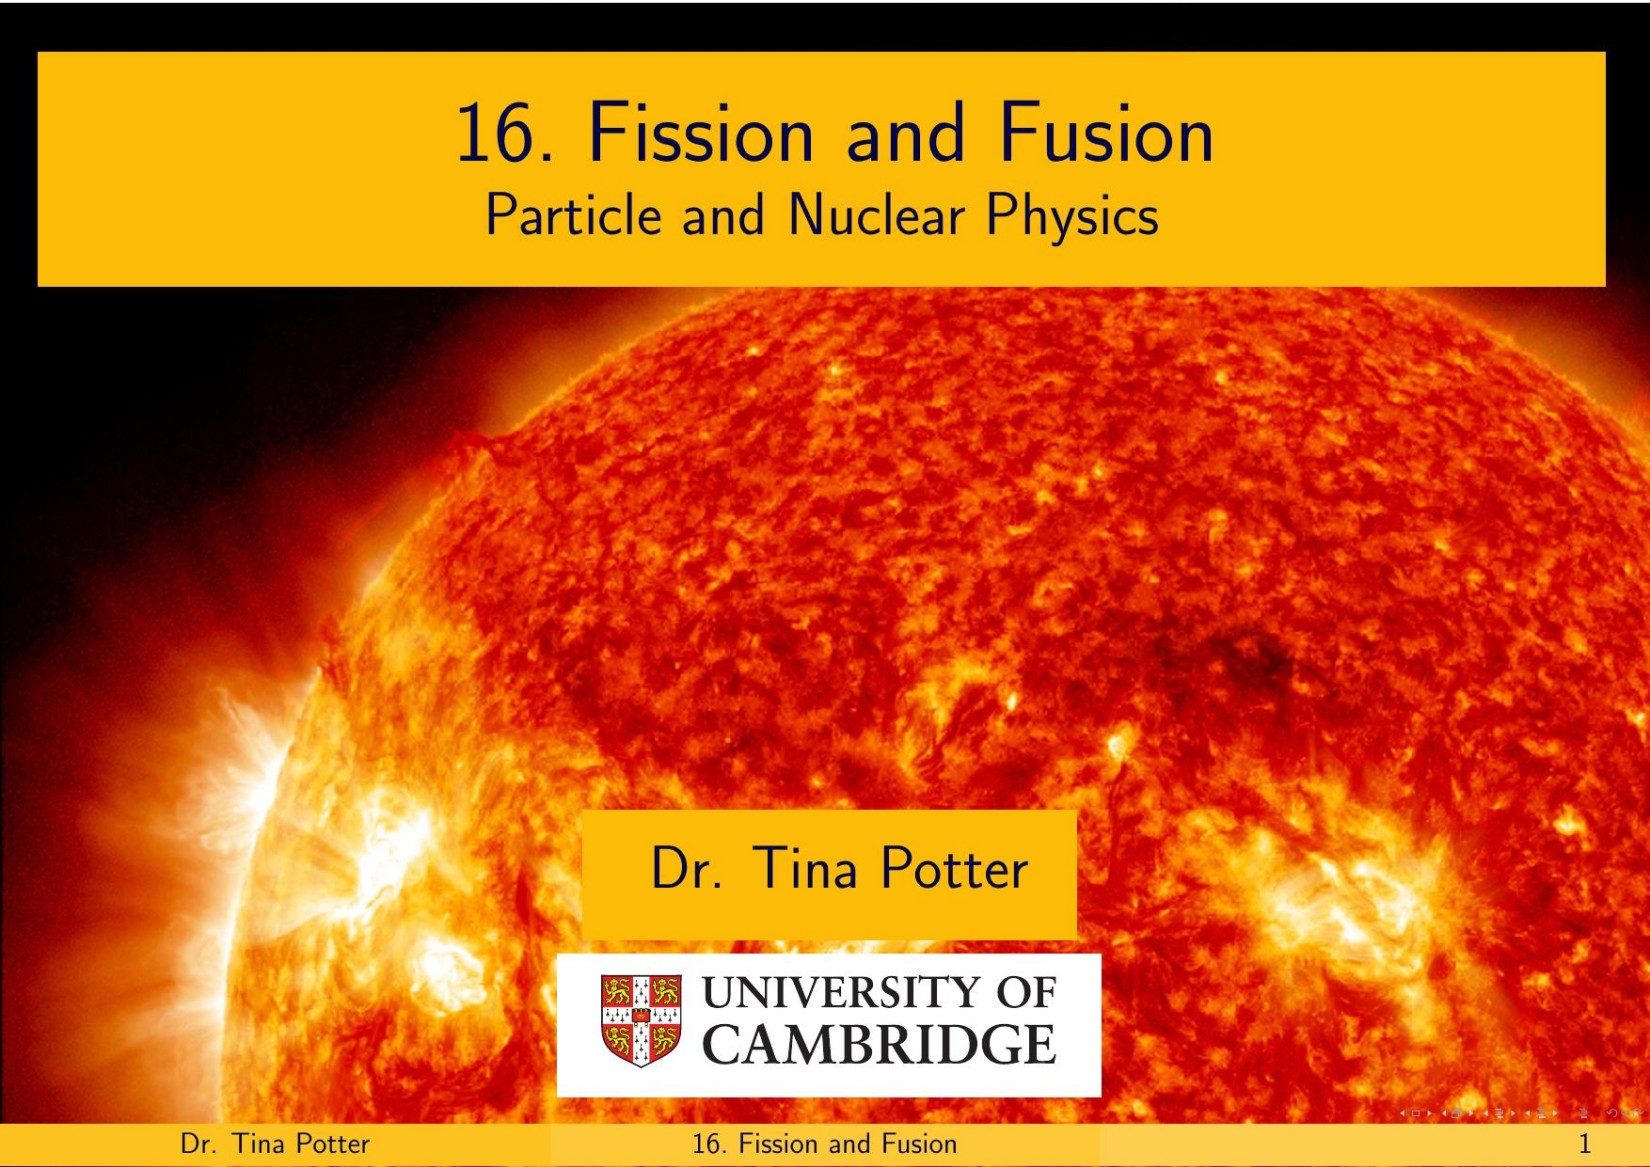 16. Fission and Fusion - Particle and Nuclear Physics